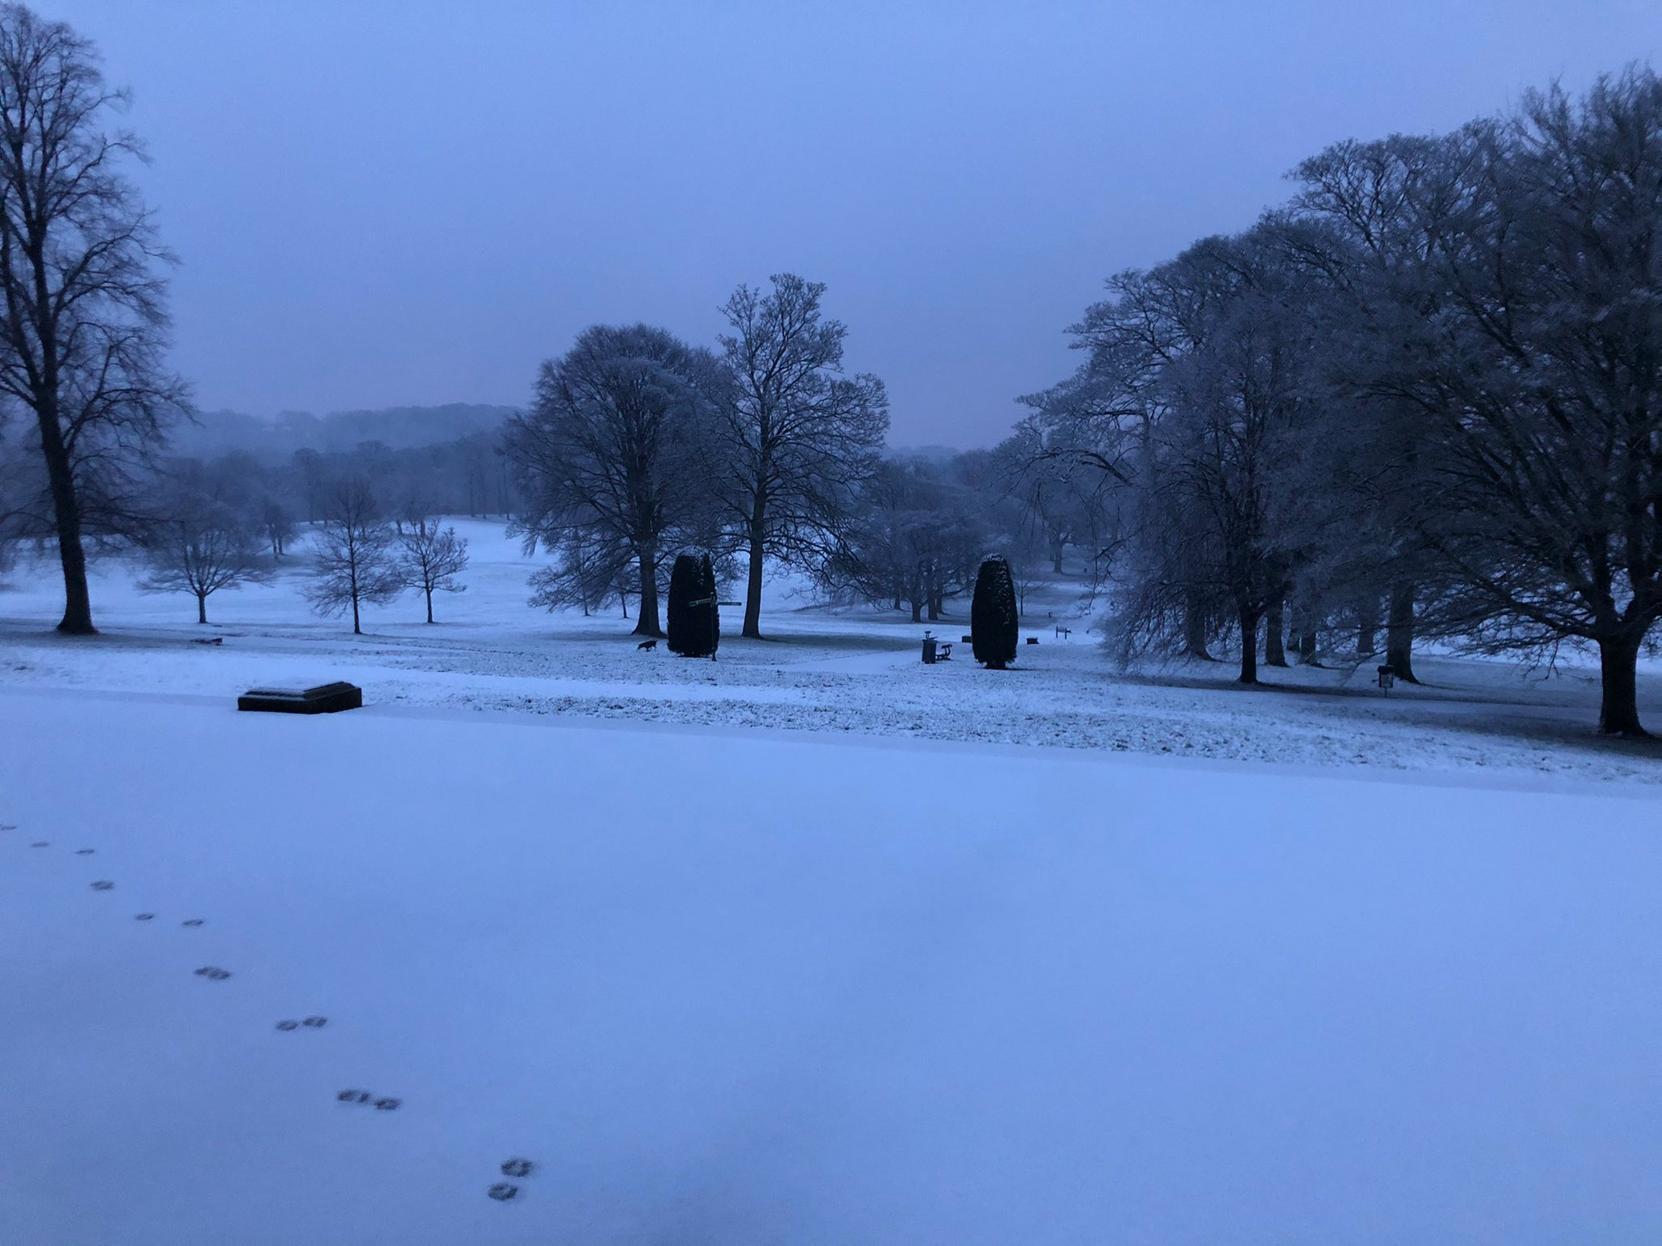 Heavy snow came down in Roundhay Park in Leeds